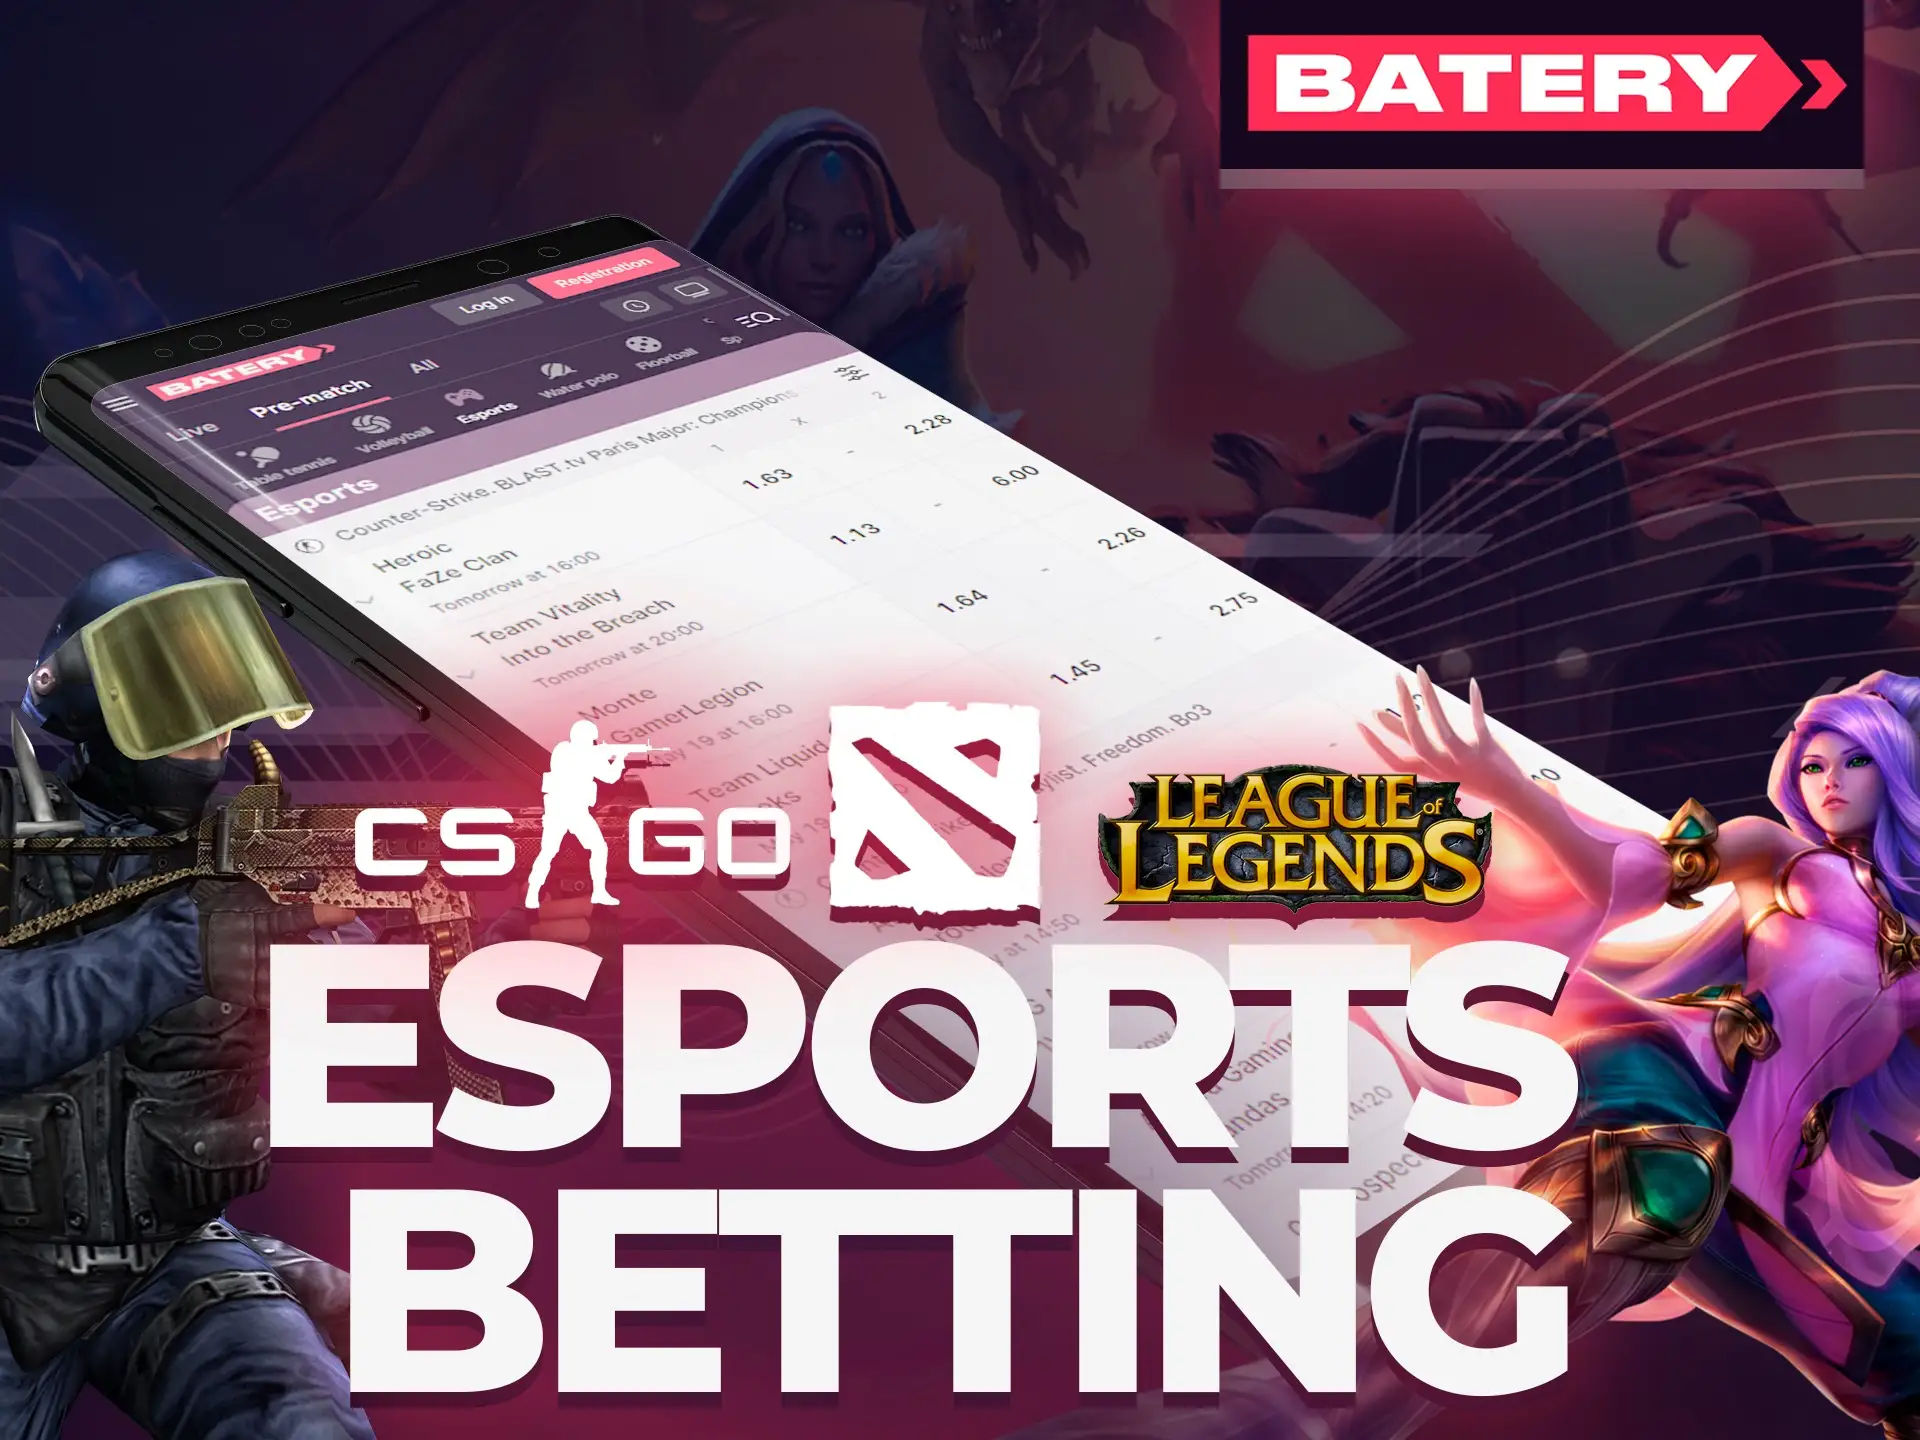 Bet on different esports types at Batery.